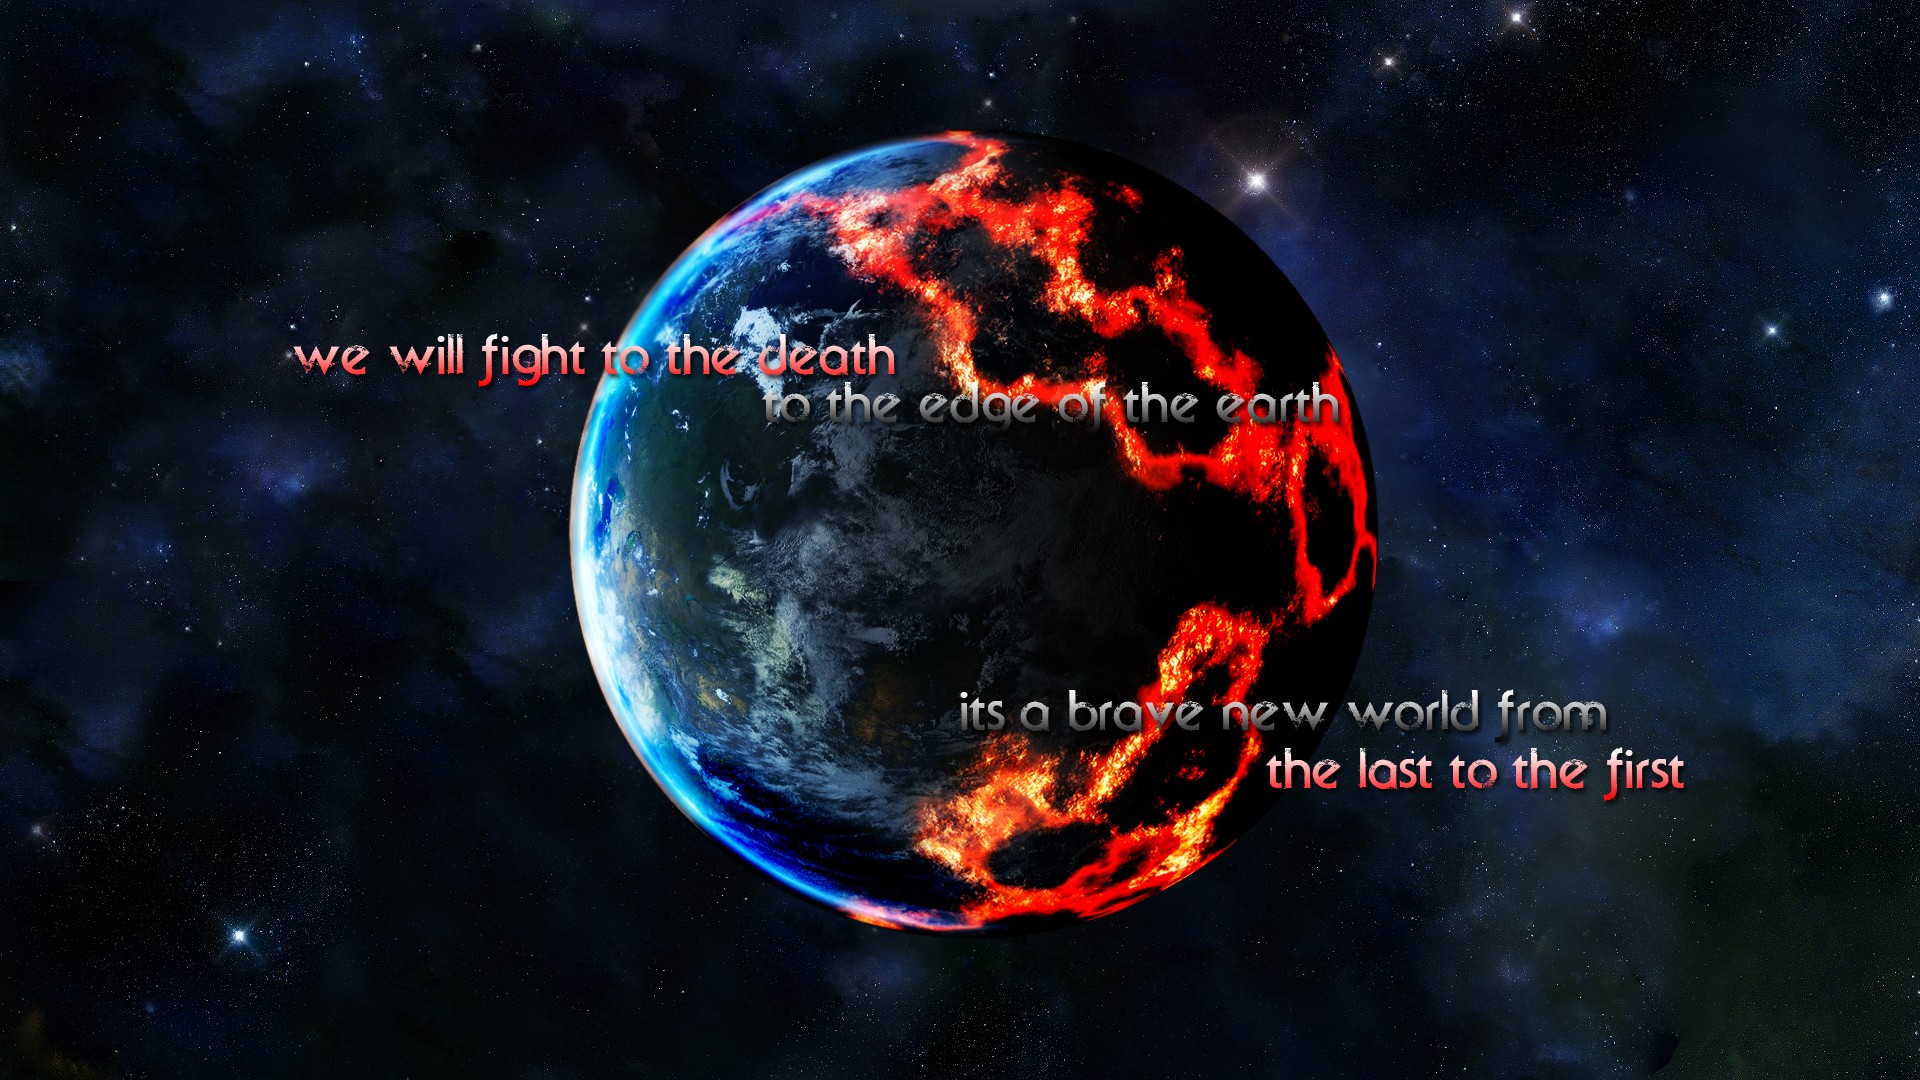 outer space, planets, quotes, lyrics, 30 Seconds to Mars - desktop wallpaper